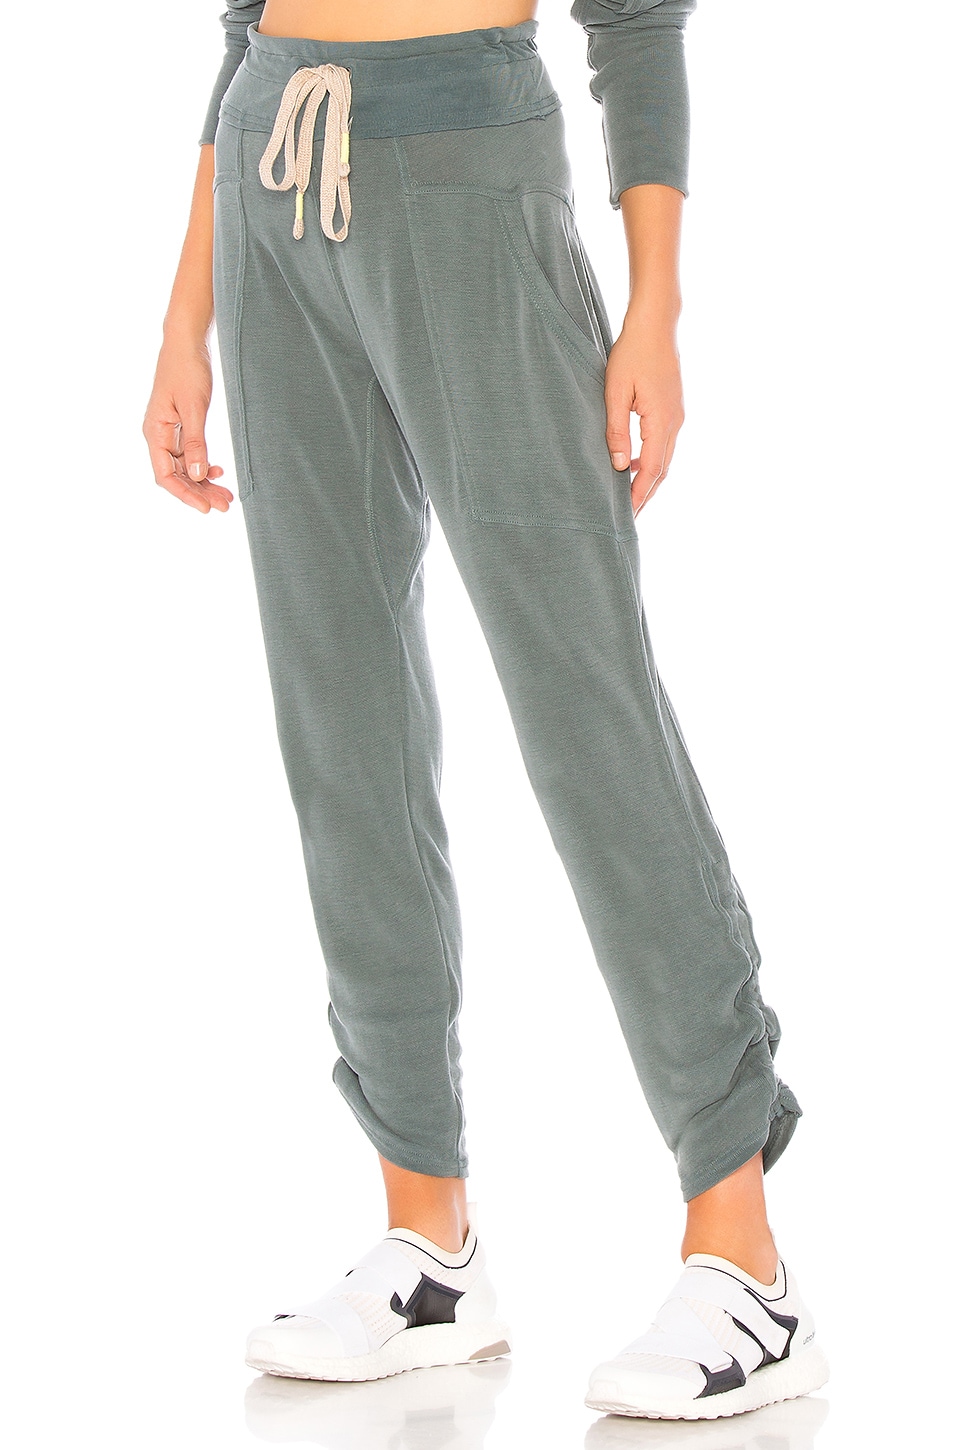 Free People X FP Movement Ready Go Pant in Pine | REVOLVE